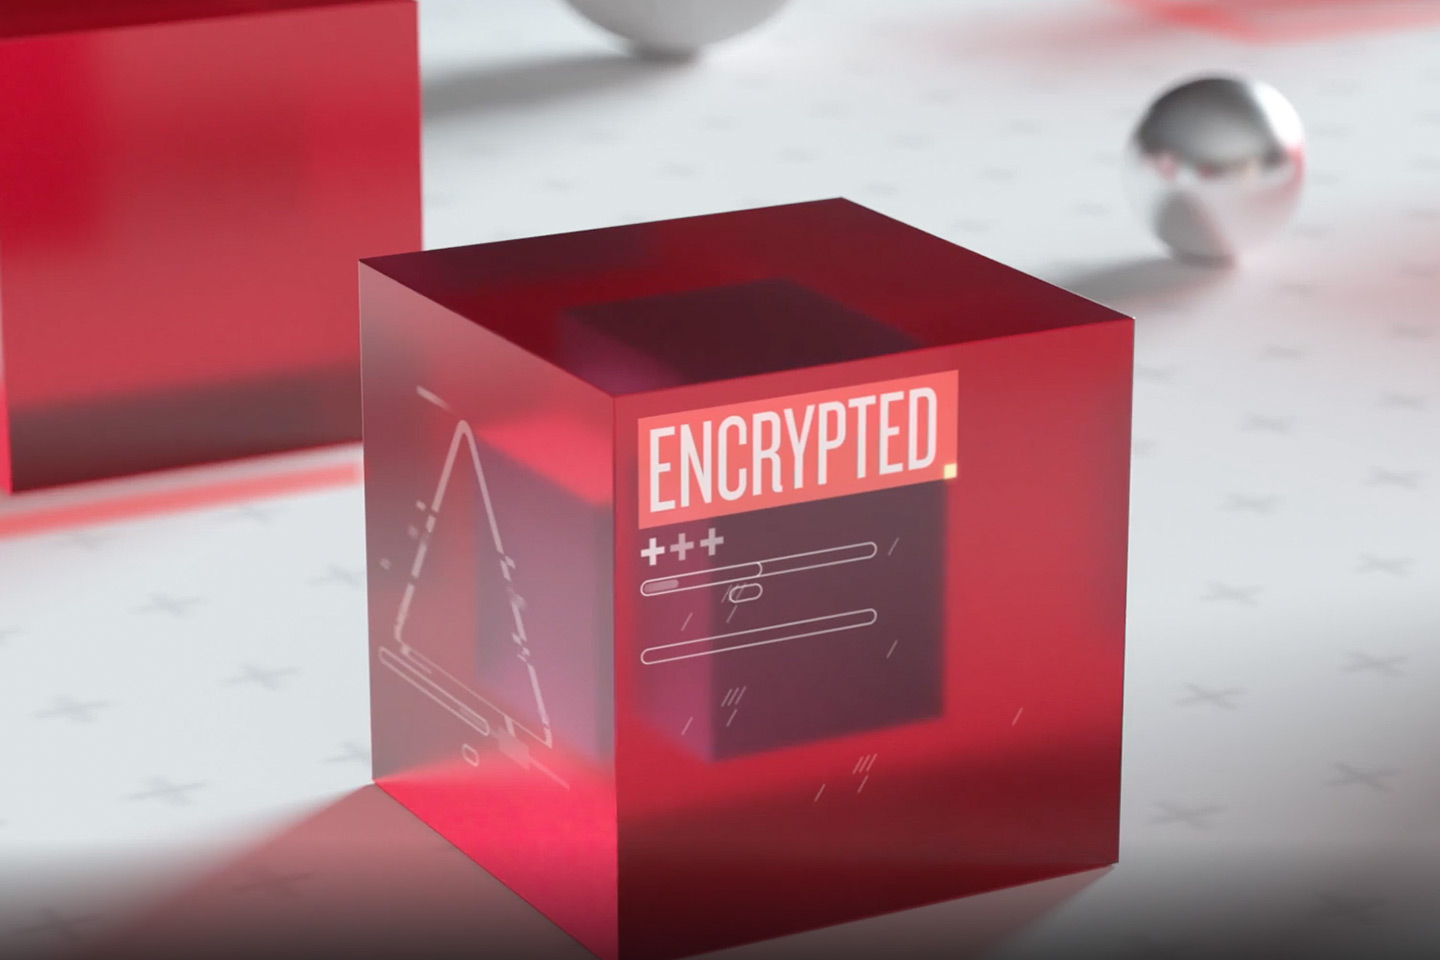 encrypted cube showing level on encryption achieved